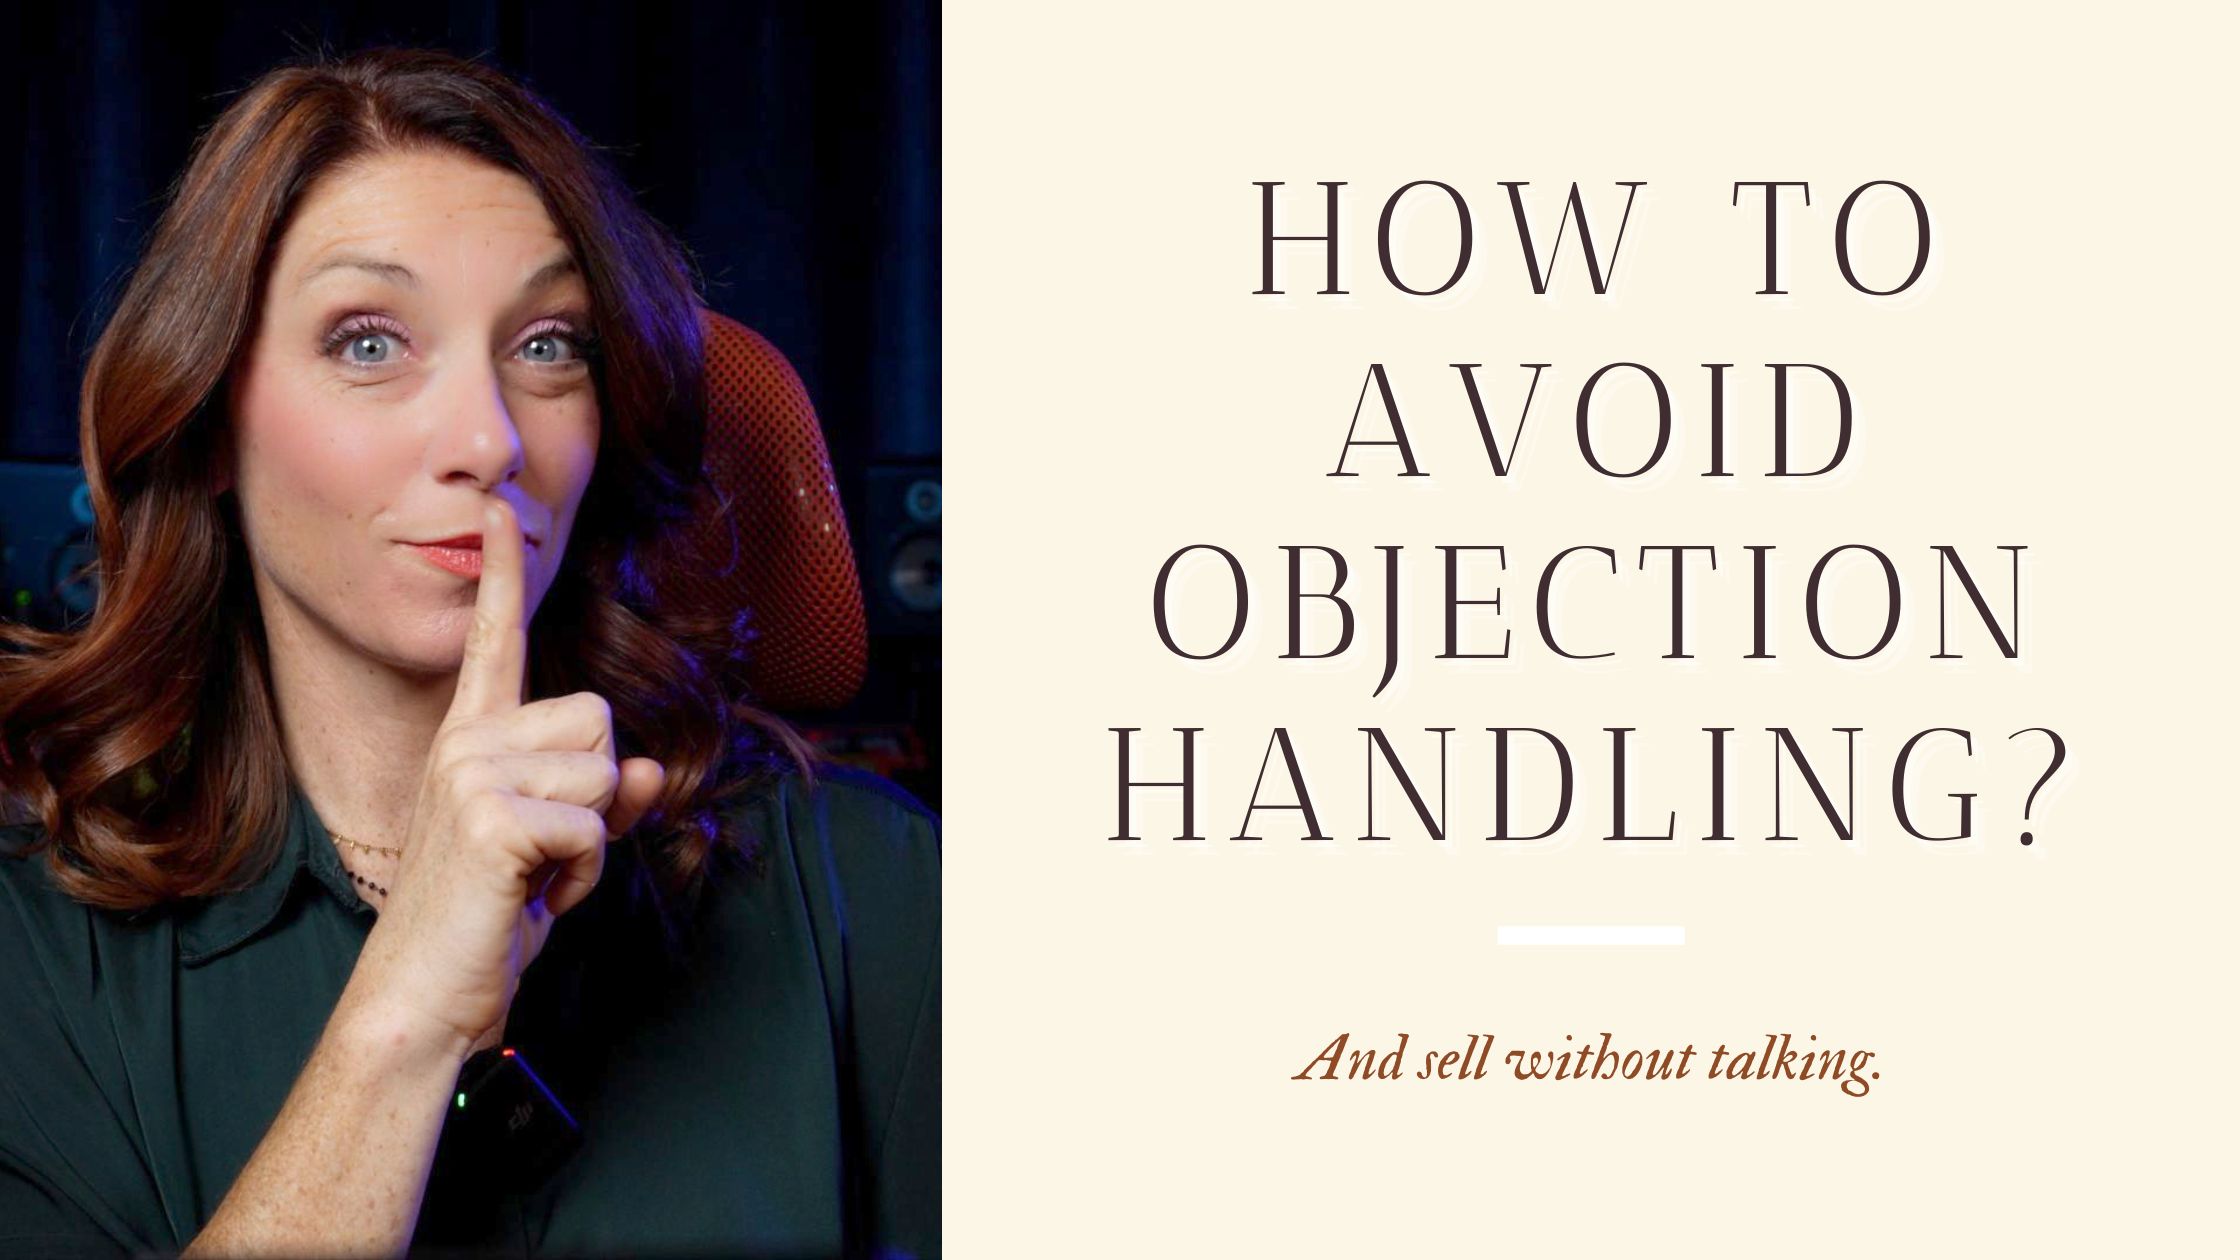 How to Avoid Objection Handling? And sell without talking.